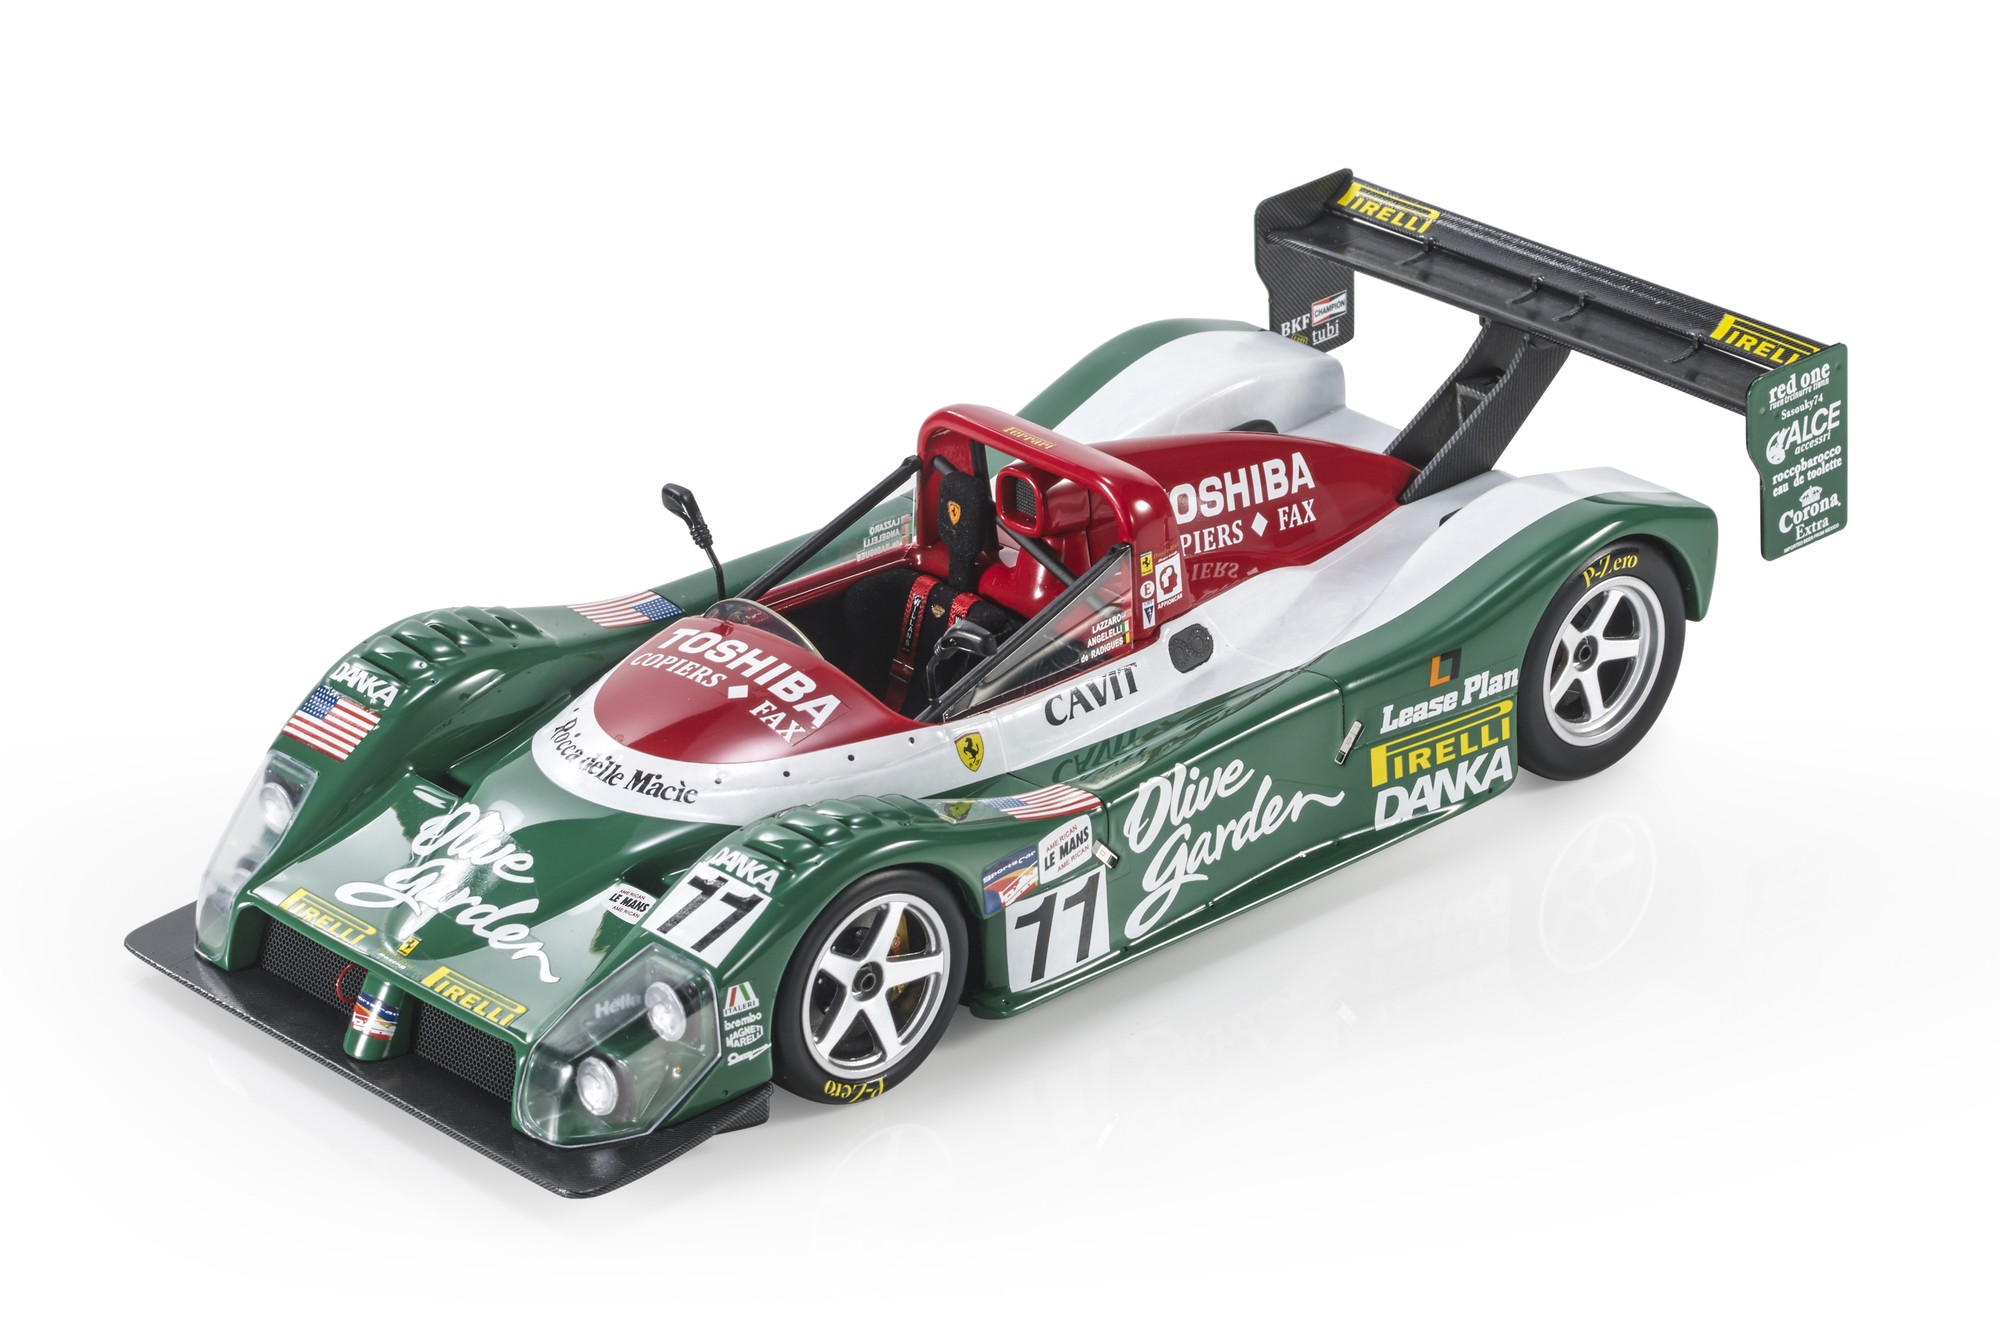 Top Marques MOMO ライセンス商品 Top Marques トップマルケス 1 18 ミニカー レジン・プロポーションモデル 1999年セブリング１２時間 フェラーリ FERRARI - F333SP 4.0L V12 F310E TEAM DOYLE-RISI RACING OLIVE GARDEN N 11 12h SEBRING 1999 A.LAZZARO - M.ANGELELLI - D.DE RADIGUES